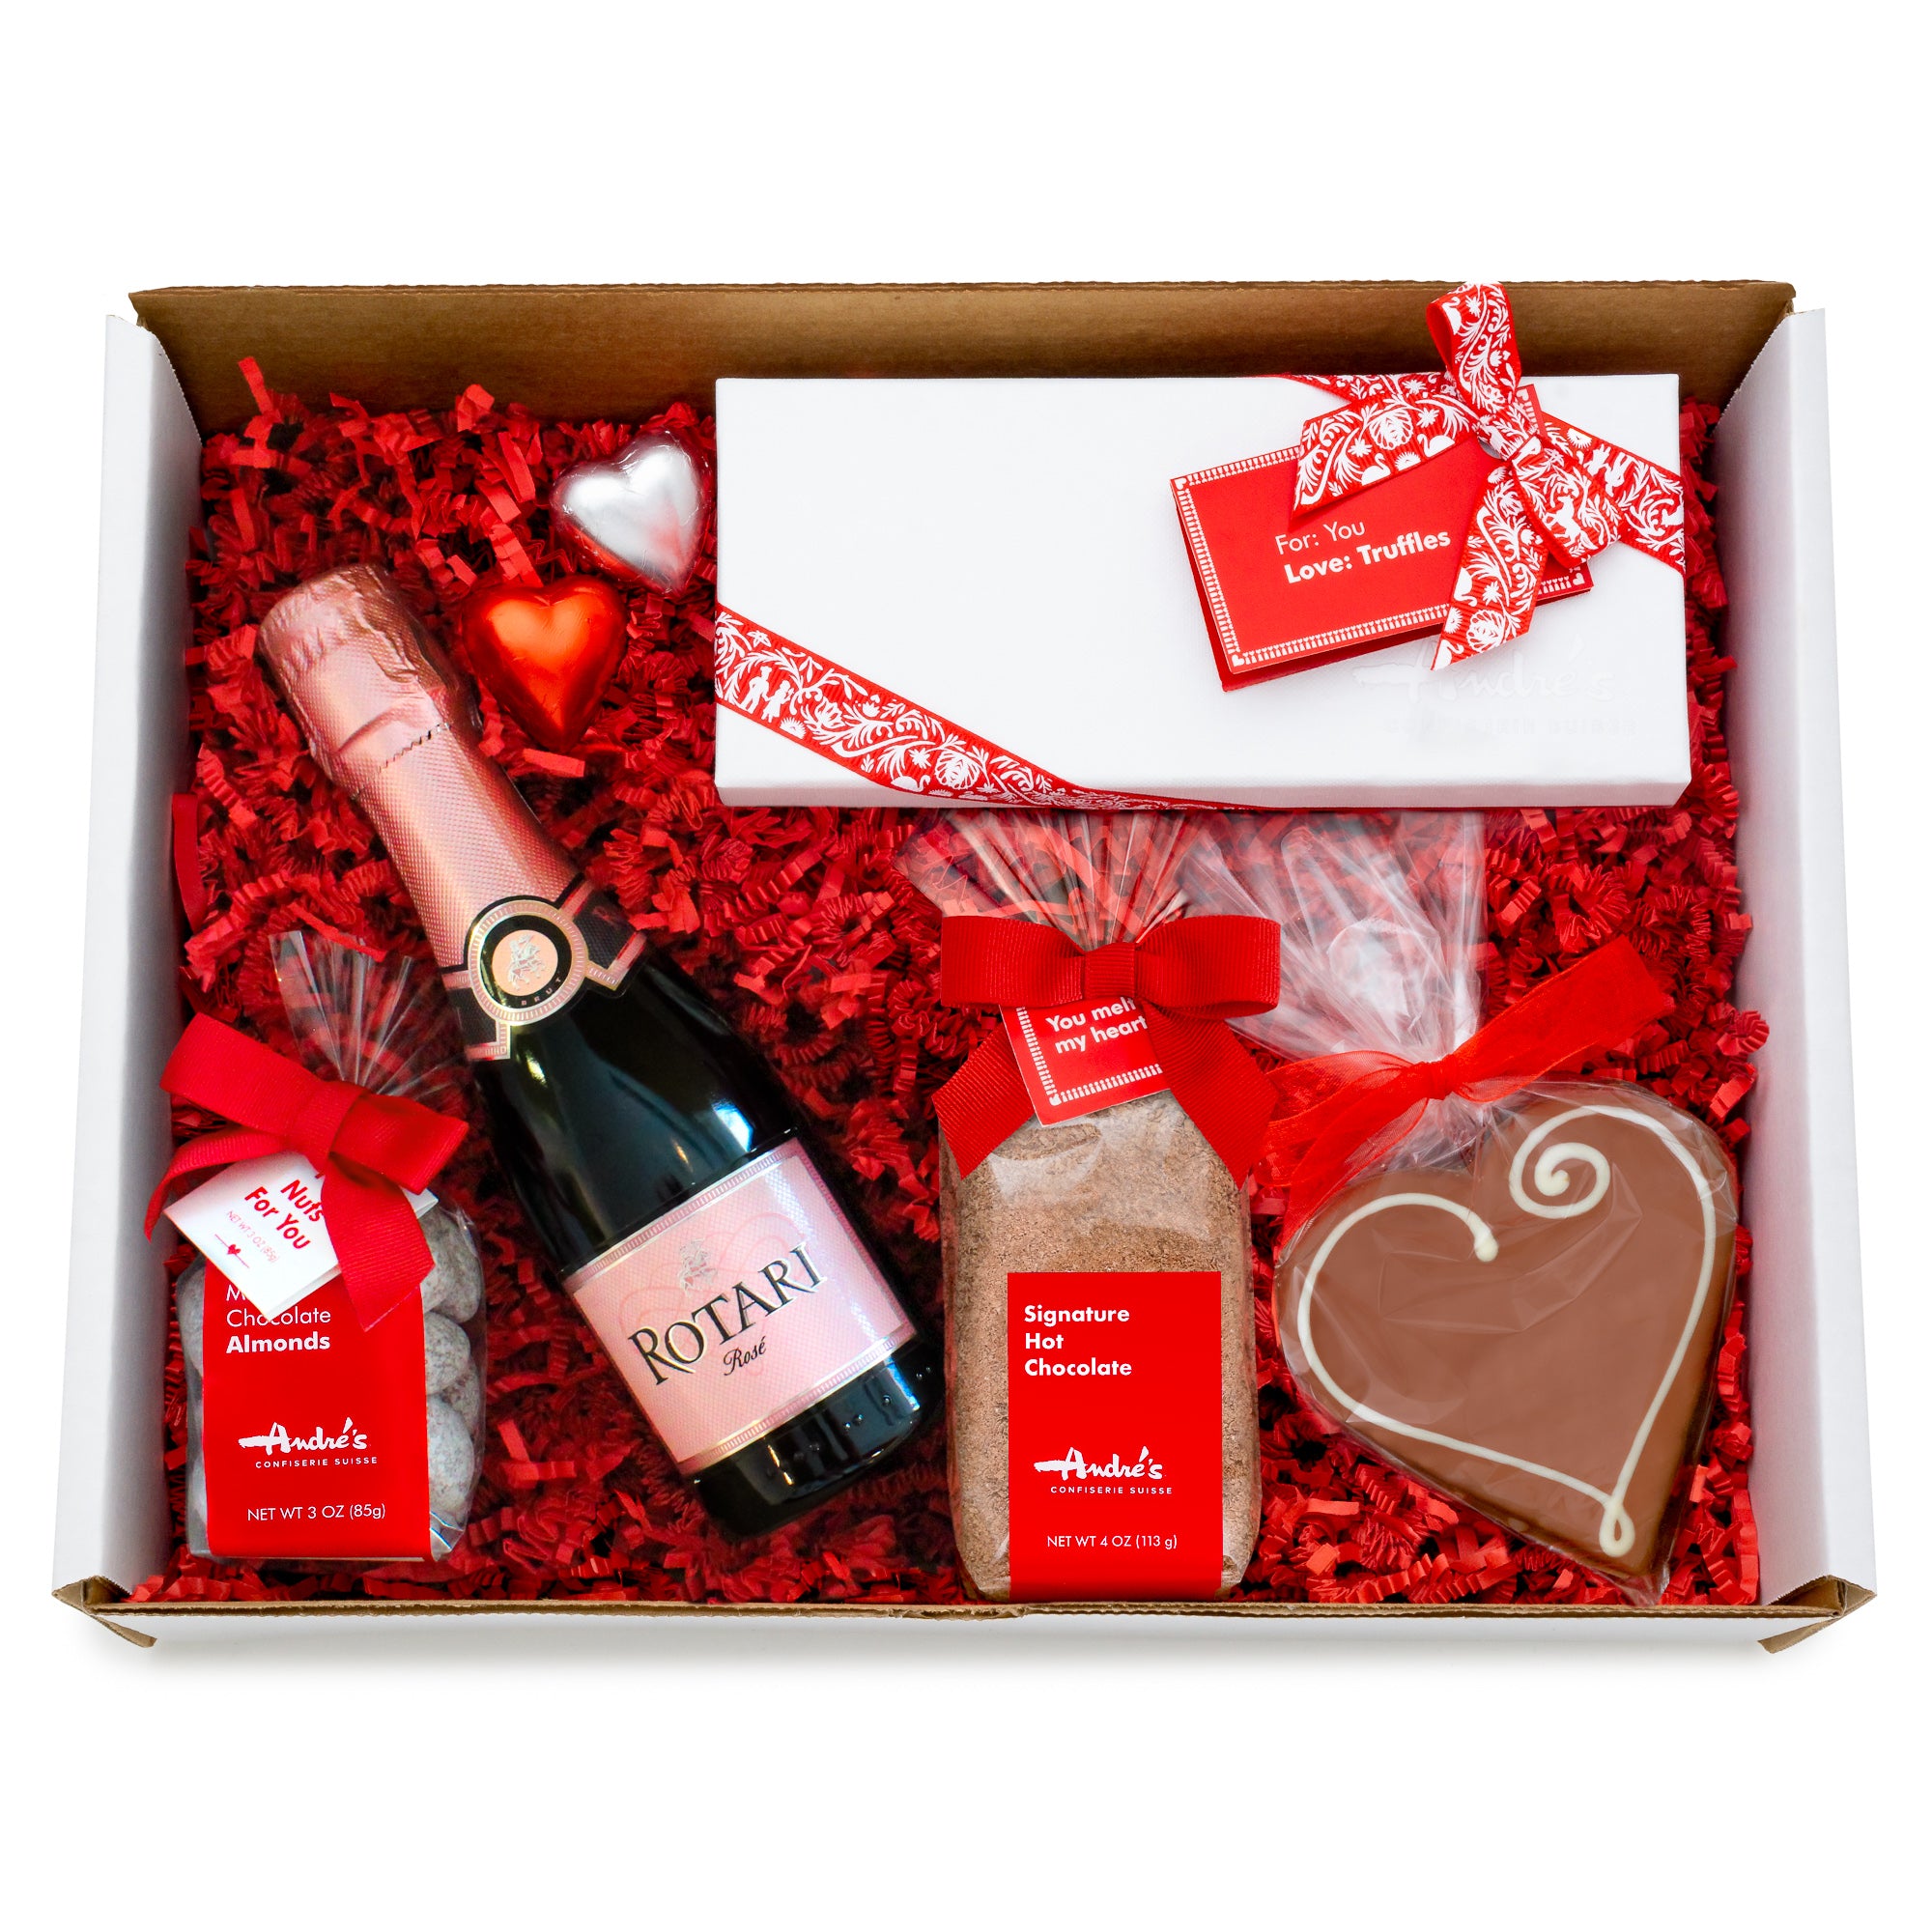 Wine + Chocolate Gift Boxes — KC Store Pickup - André's Confiserie Suisse